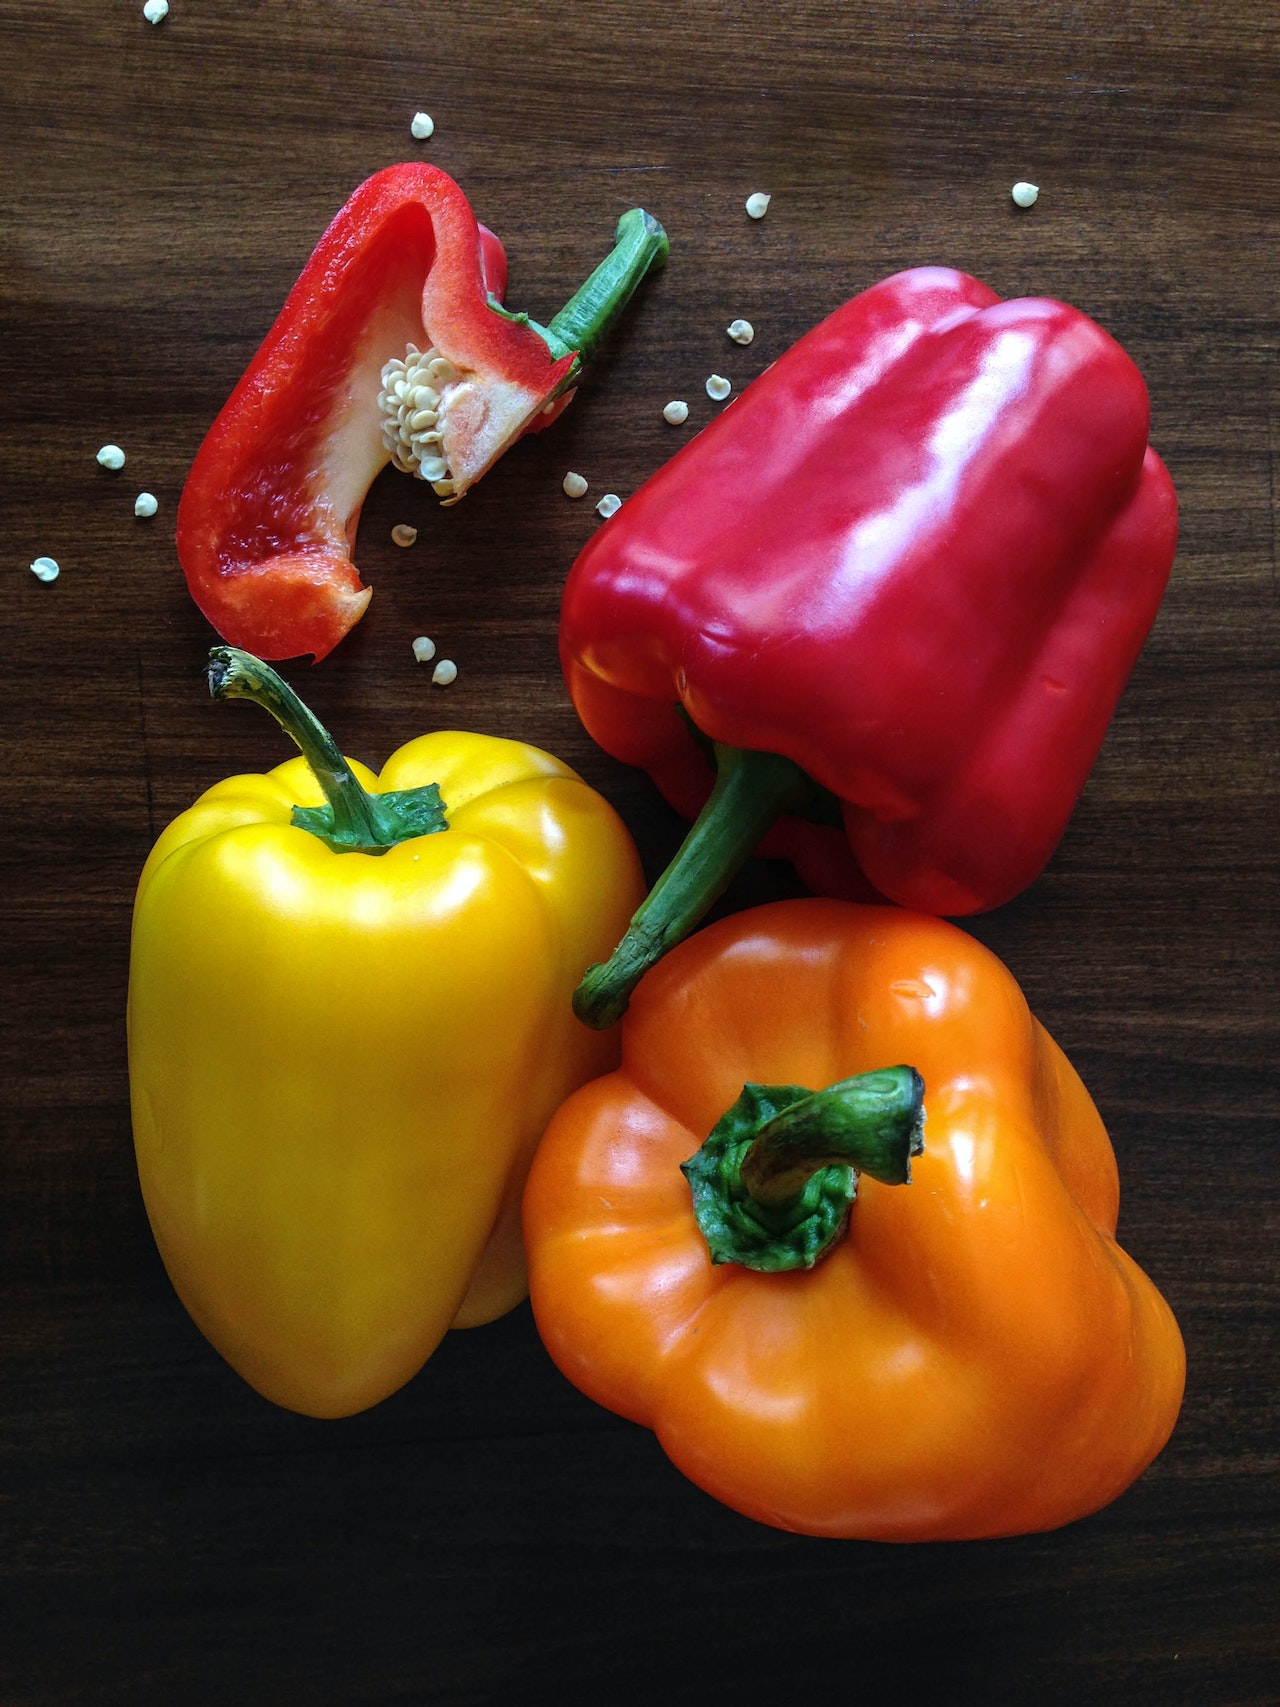 Yellow, orange, and red bell peppers